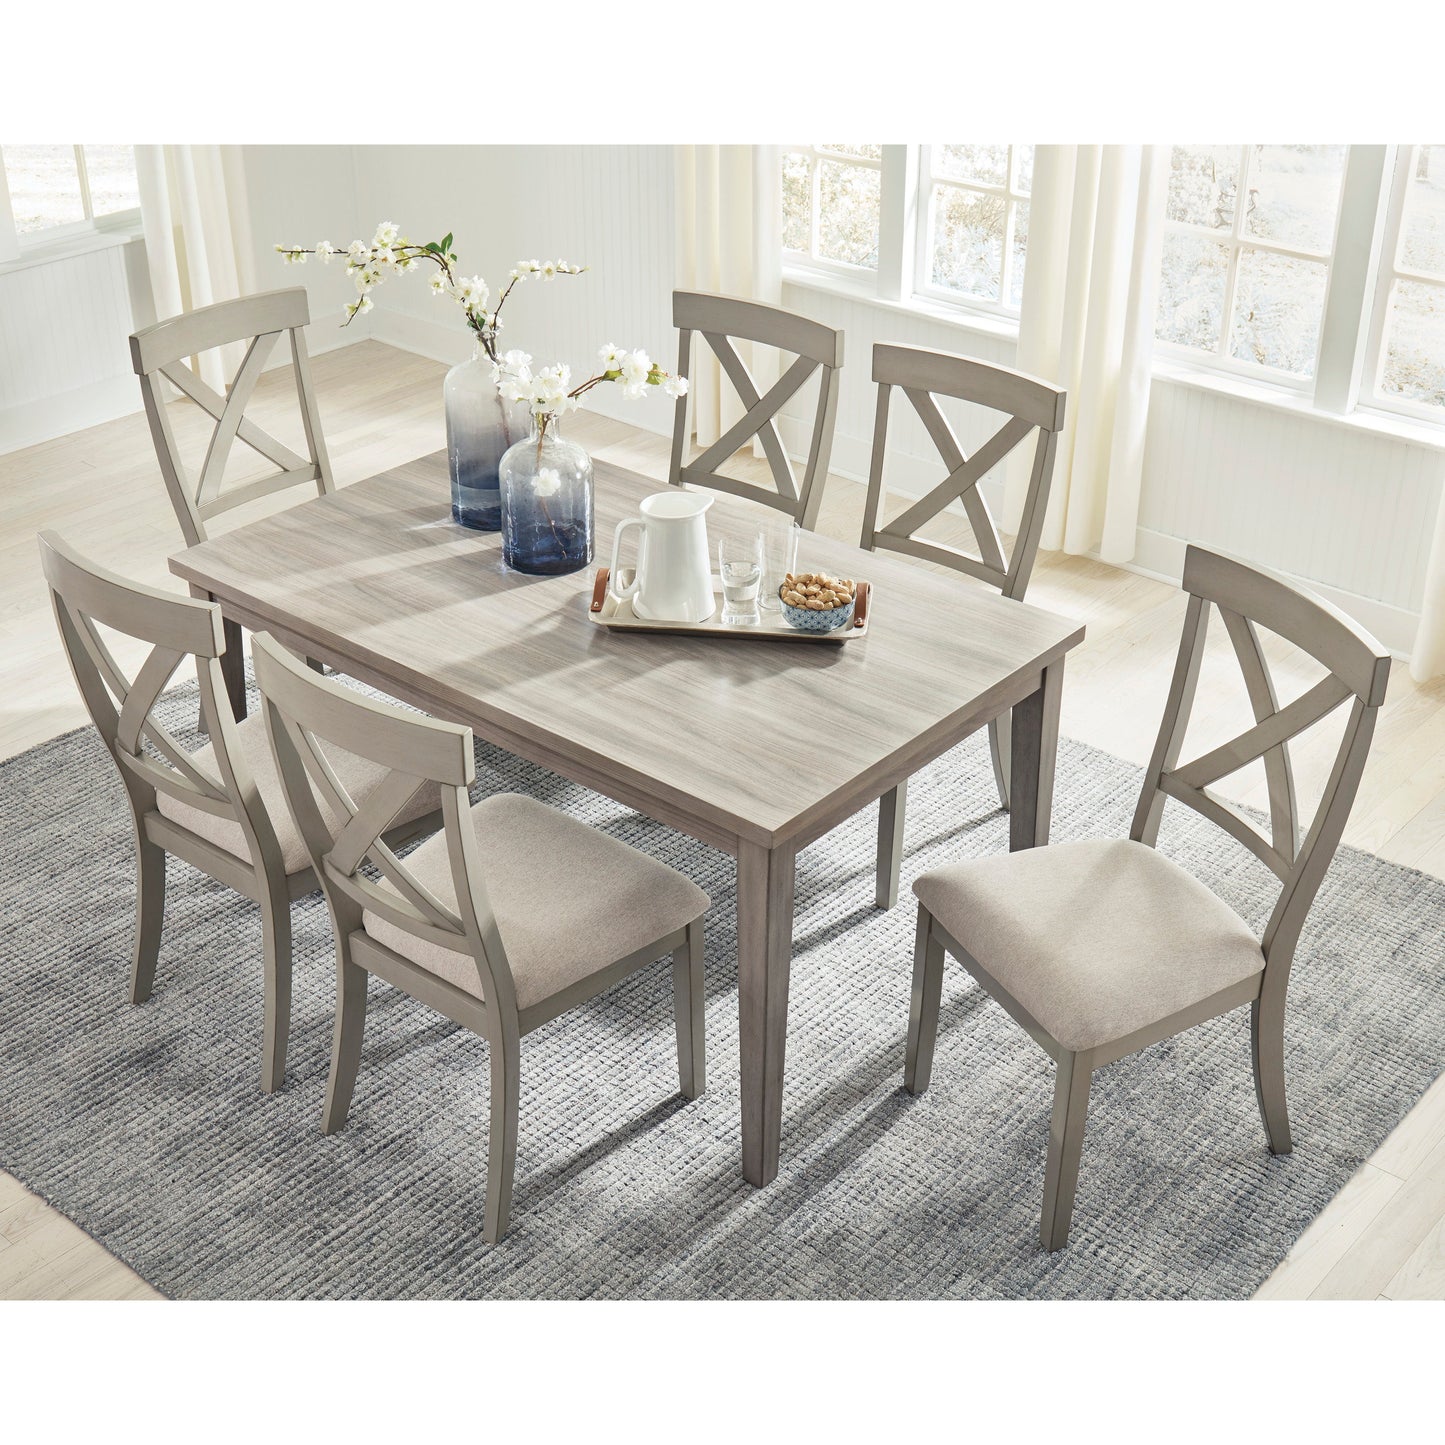 PARELLEN DINING SET - TABLE & 6 CHAIRS